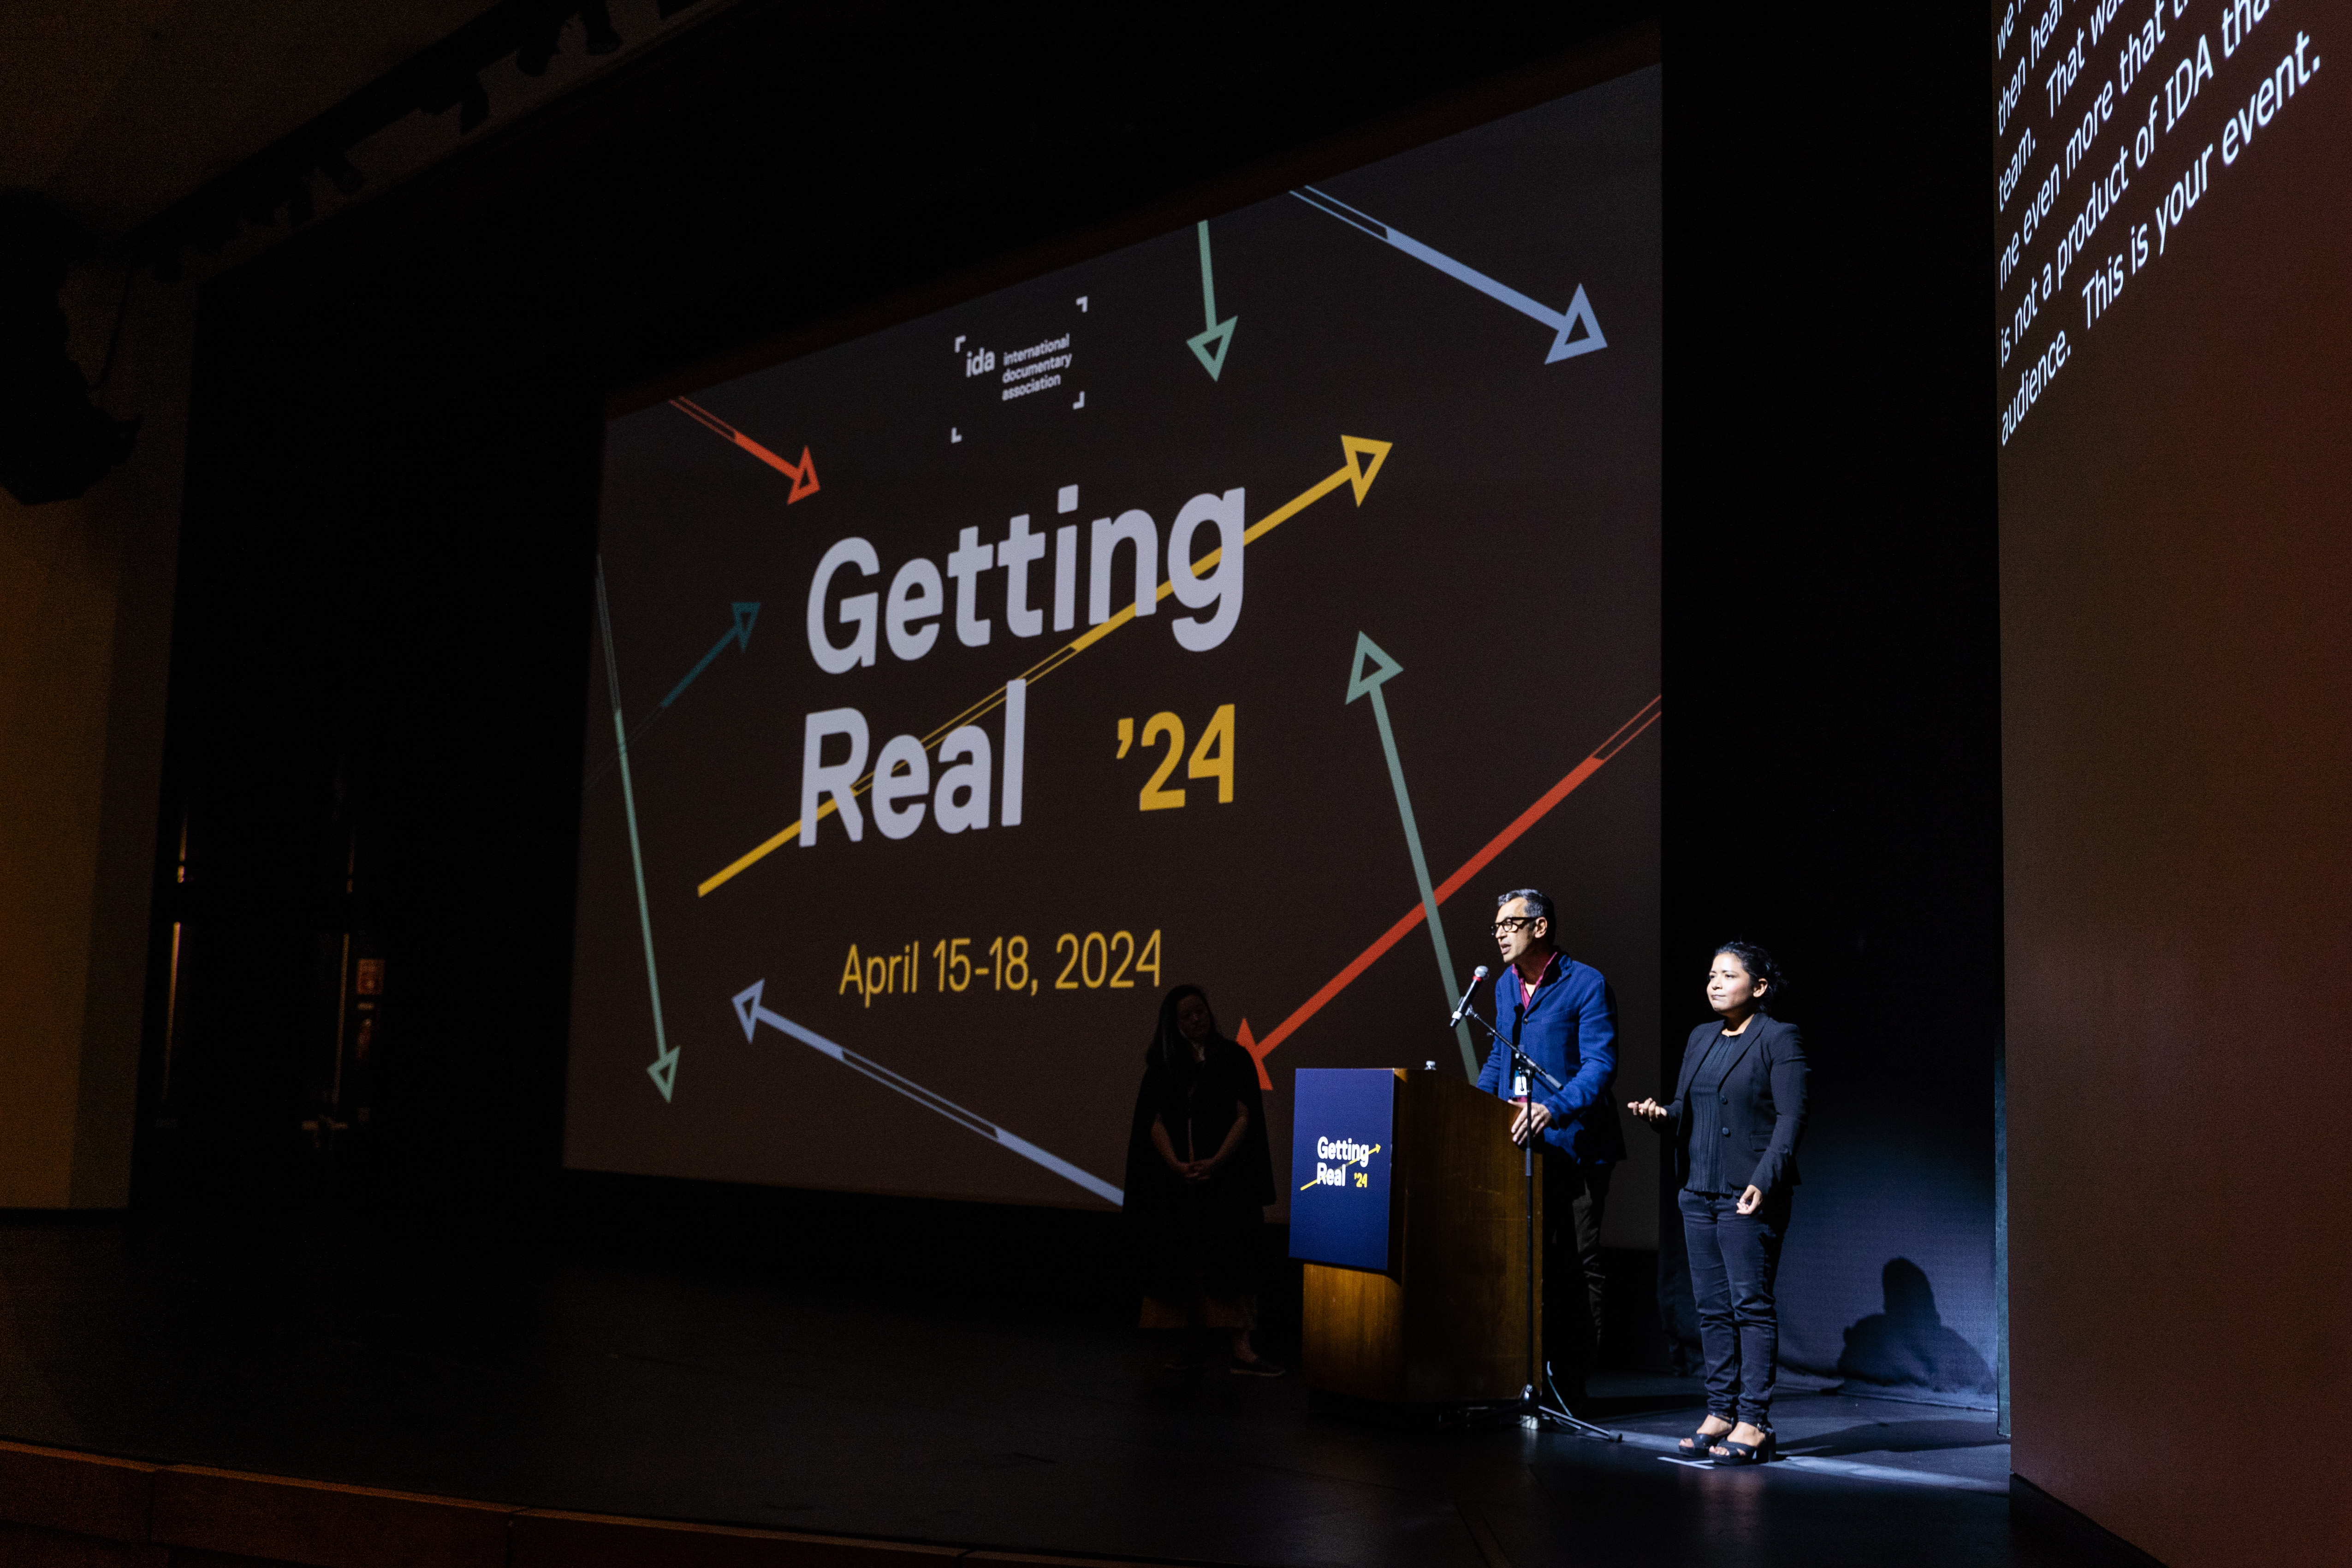 Abby Sun (Director of Artist Programs, IDA) and Dominic Asmall Willsdon (Executive Director, IDA) on the stage at the closing night of Getting Real ’24 conference.